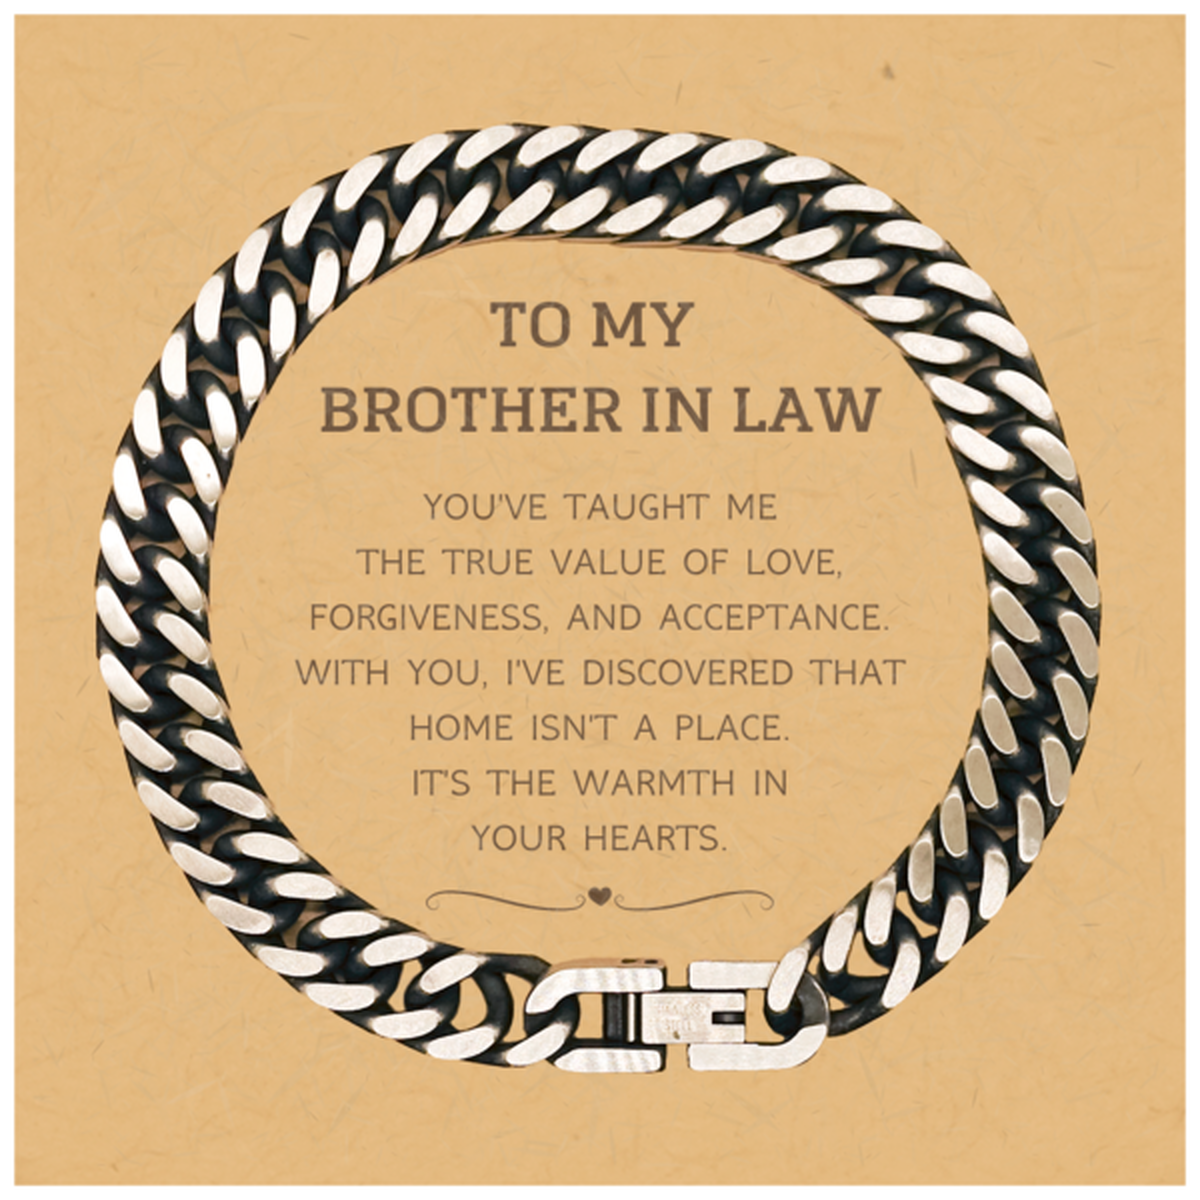 To My Brother In Law Gifts, You've taught me the true value of love, Thank You Gifts For Brother In Law, Birthday Christmas Cuban Link Chain Bracelet For Brother In Law